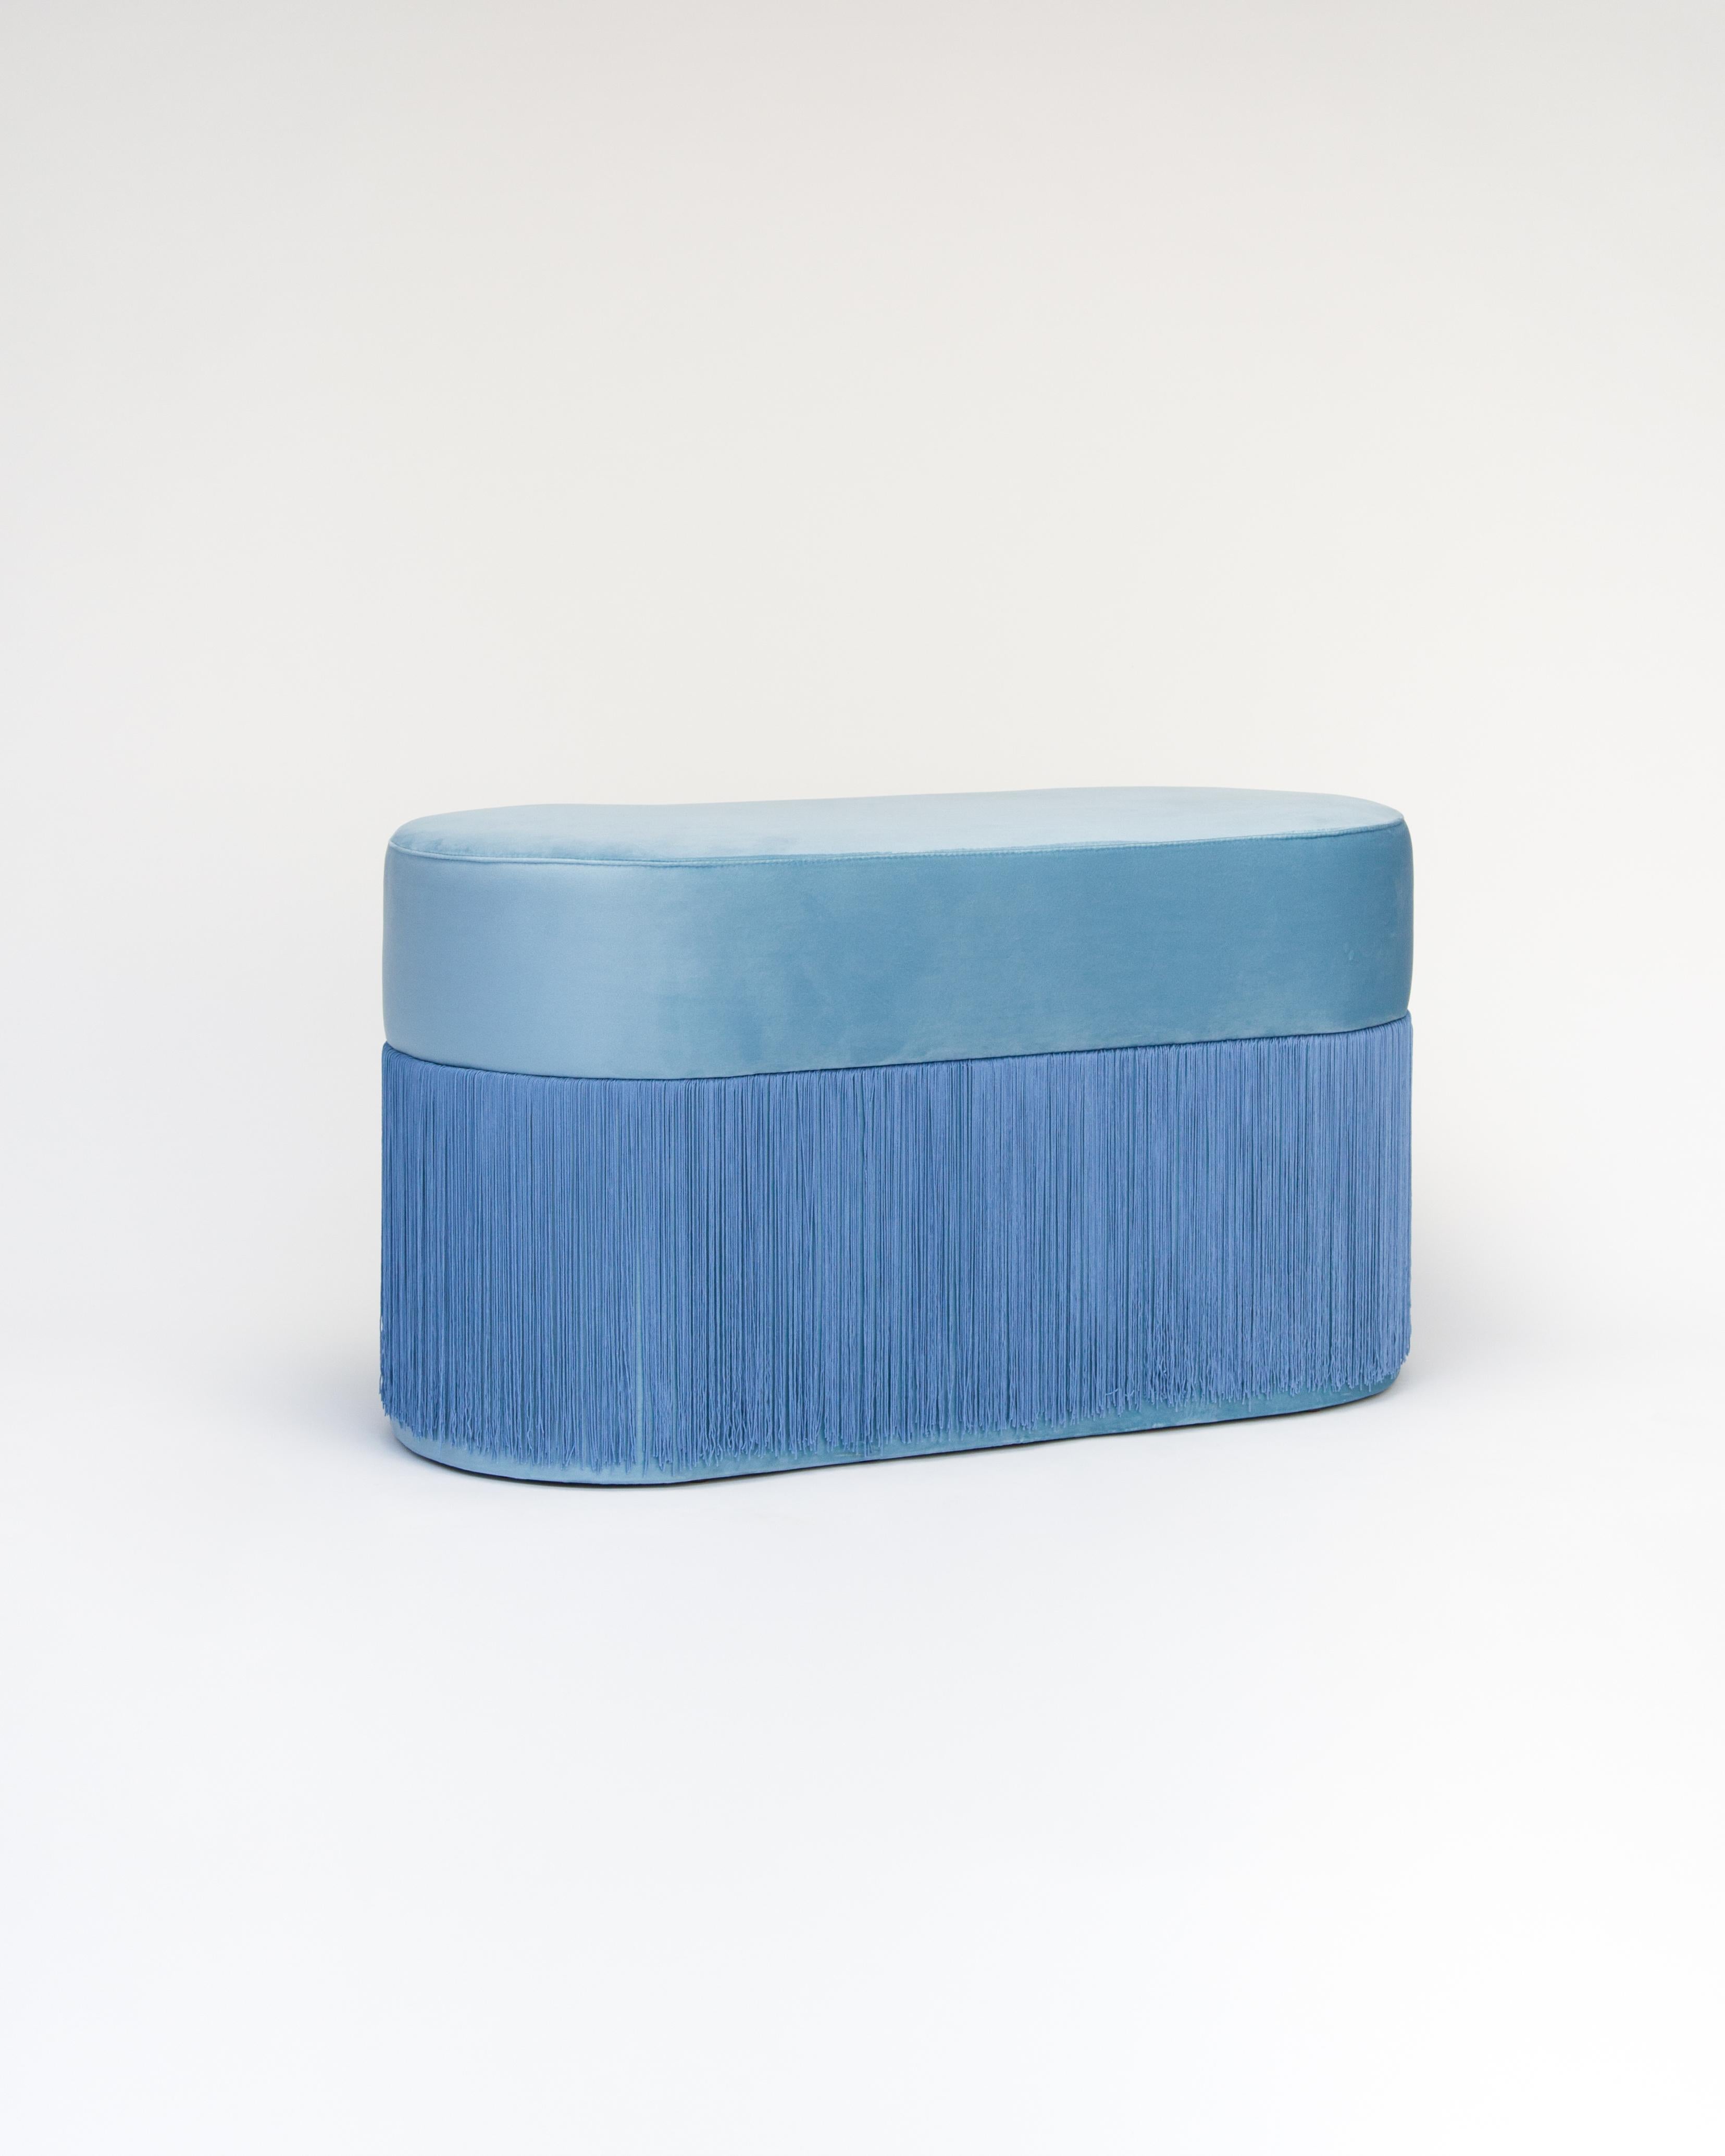 Pouf pill L by Houtique
Dimensions: H 45 x 80 x 35 cm
Materials: Velvet upholstery and 30cm fringes

Pill Pouf L
Art-deco style pouf with wood structure and velvet fabric.
2 fiber-board discs of 16mm, joined by wooden tufts.
Upholstery Velvet